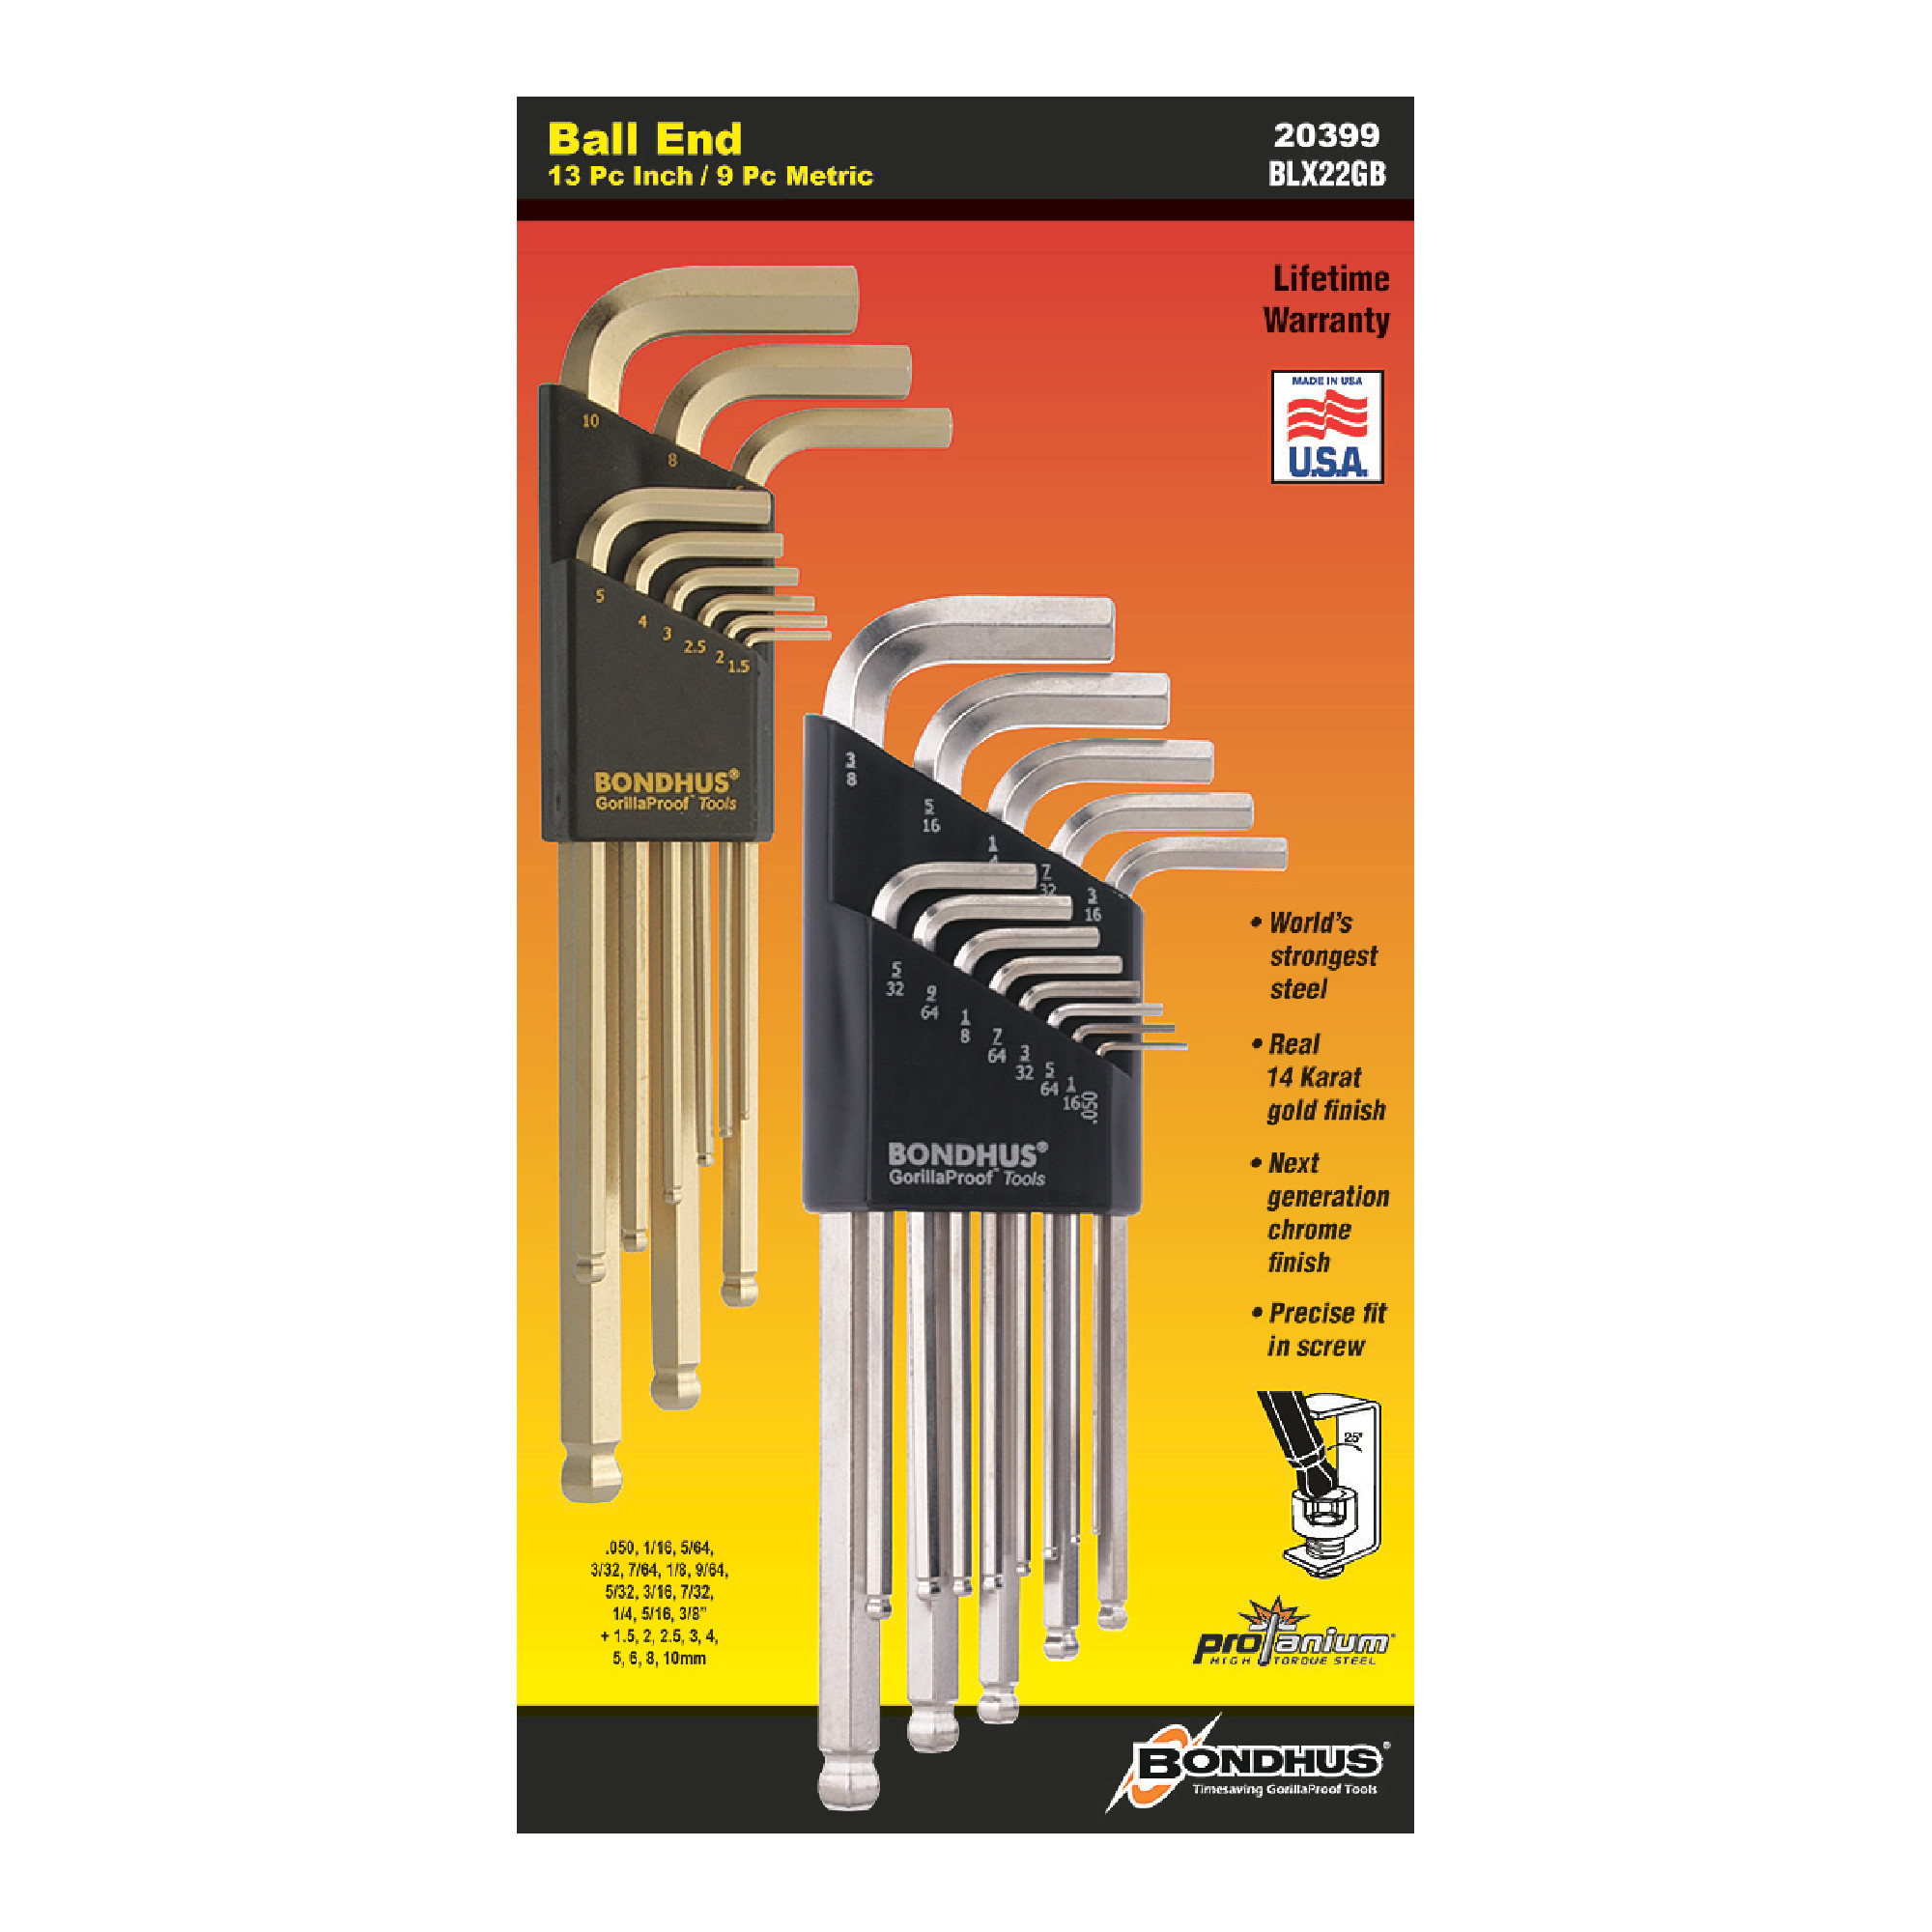 Silver & Gold Plated Balldriver&#174; L-Wrench Set